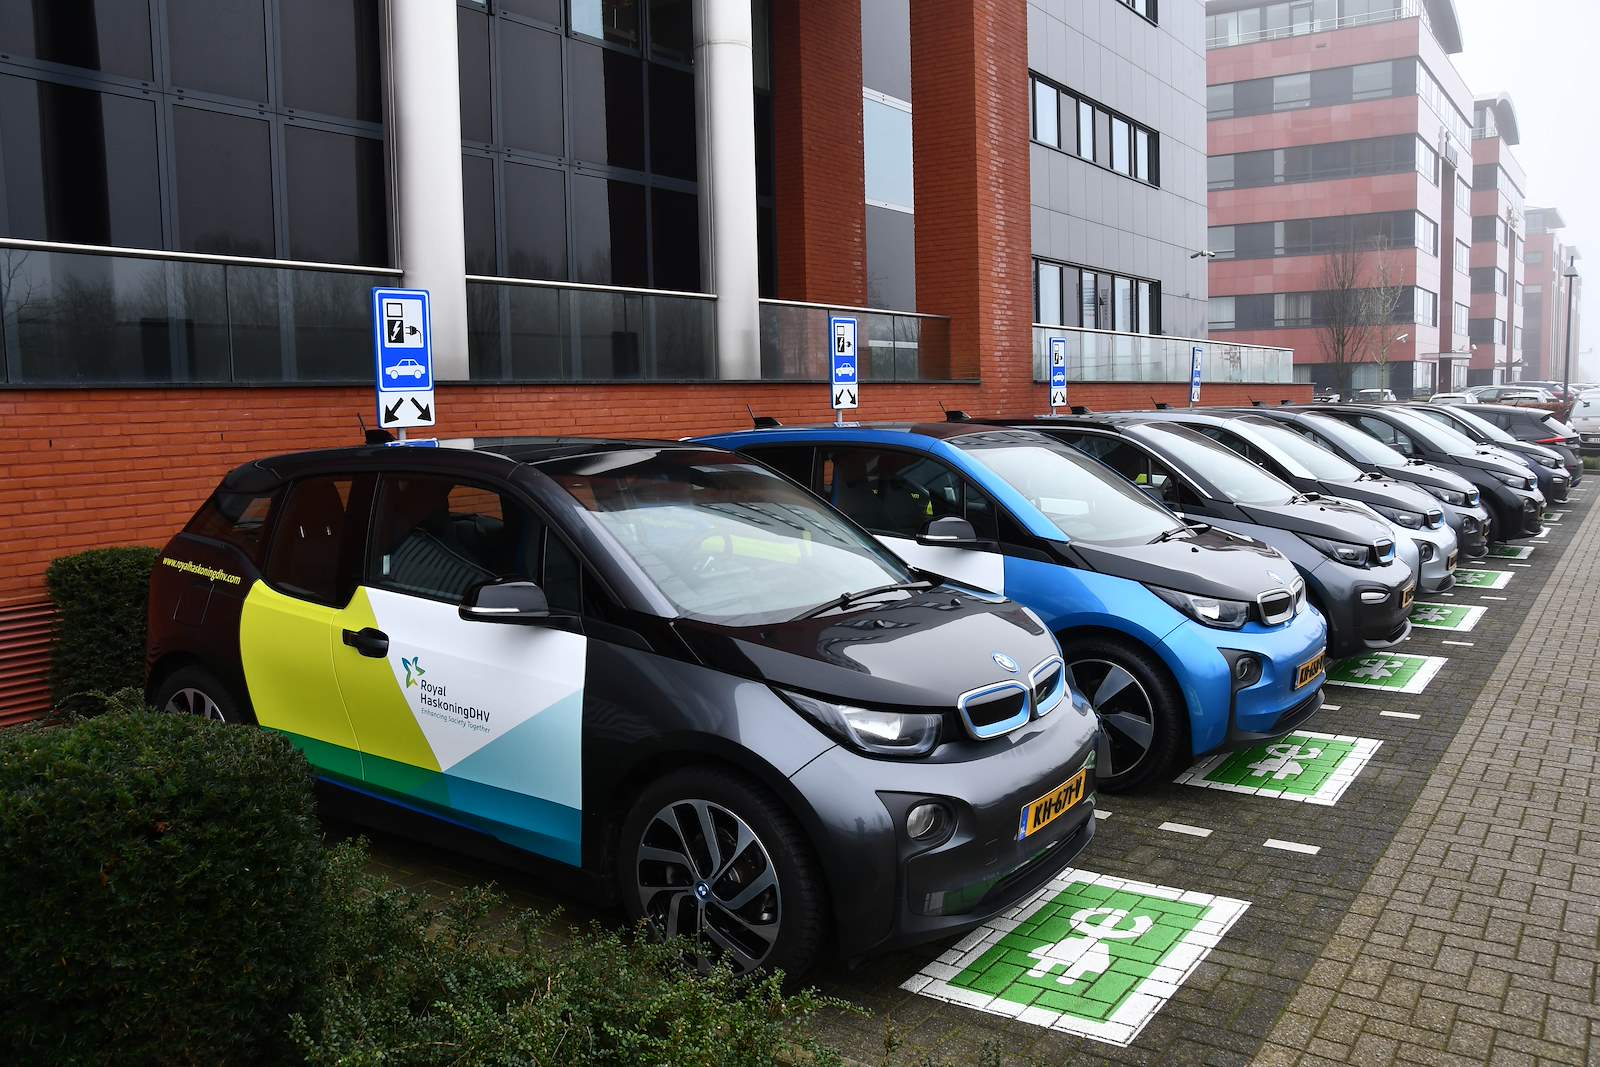 Sustainable mobility 100% Electric lease fleet, Amersfoort office, The Netherlands